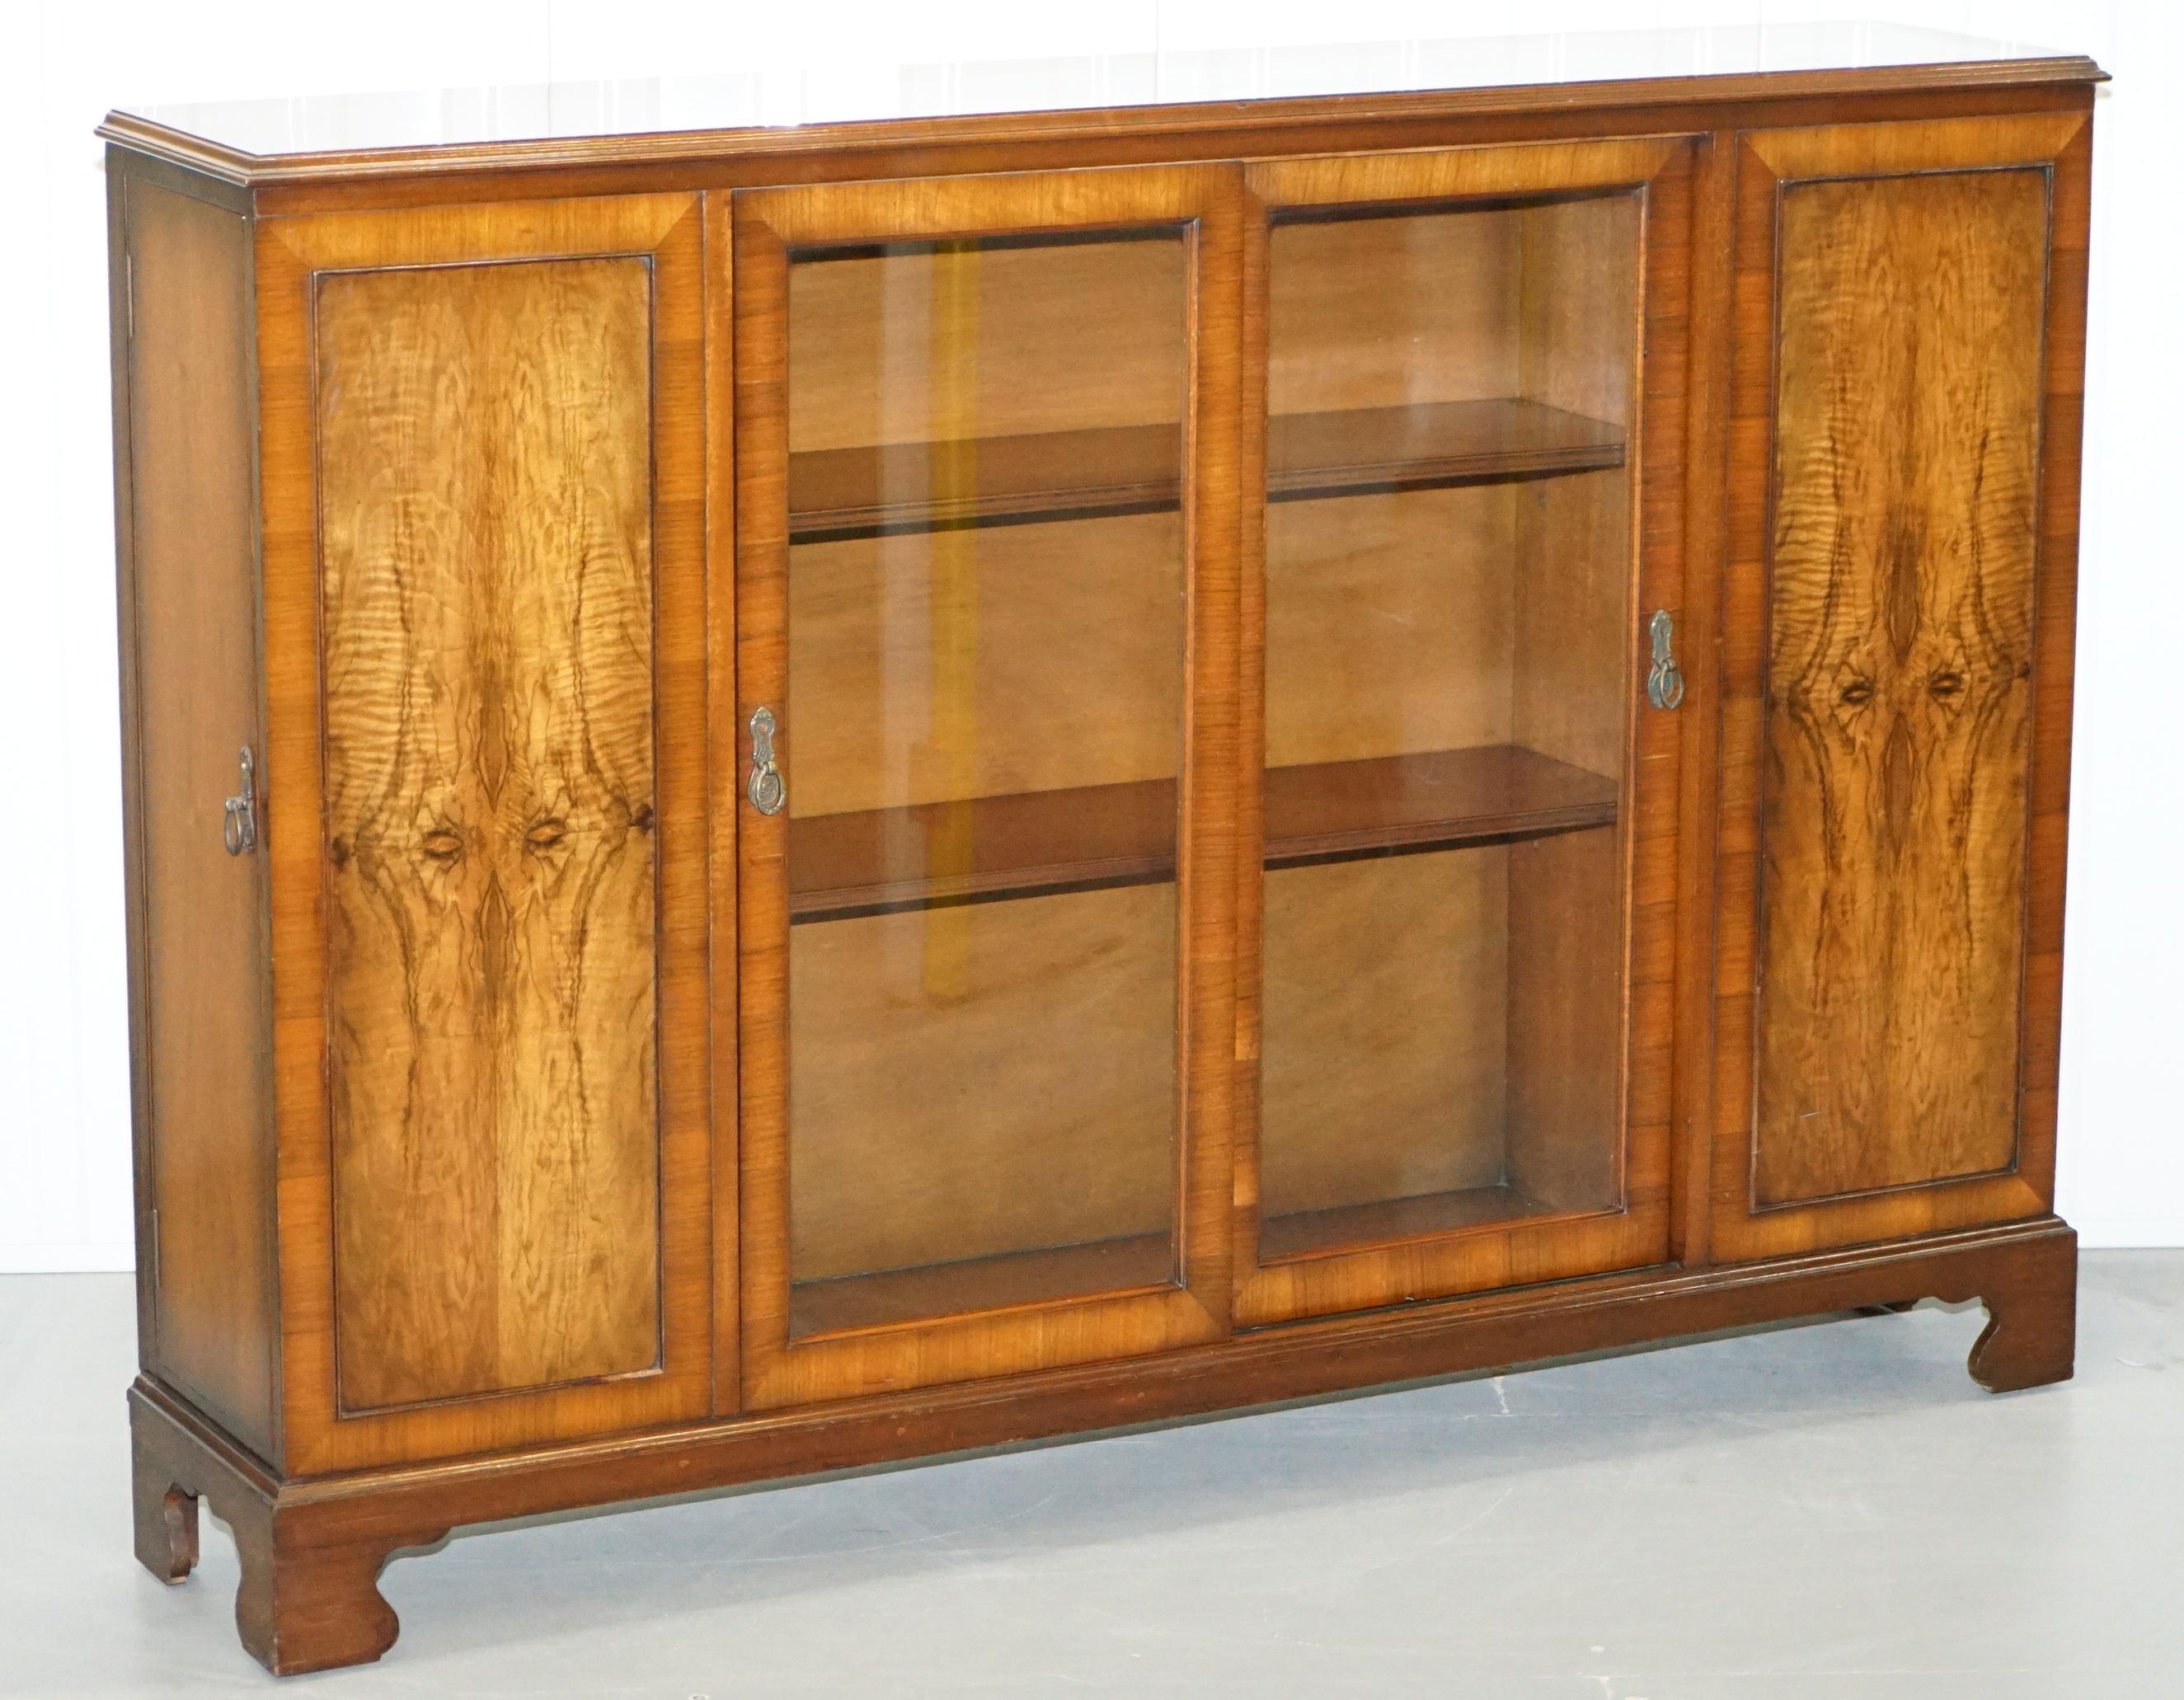 We are delighted to offer for sale this lovely pair of Figured Walnut Berick furniture hand made in England sideboard bookcases with sliding doors and side cupboards

Please note the delivery fee listed is just a guide

There are around 50-100